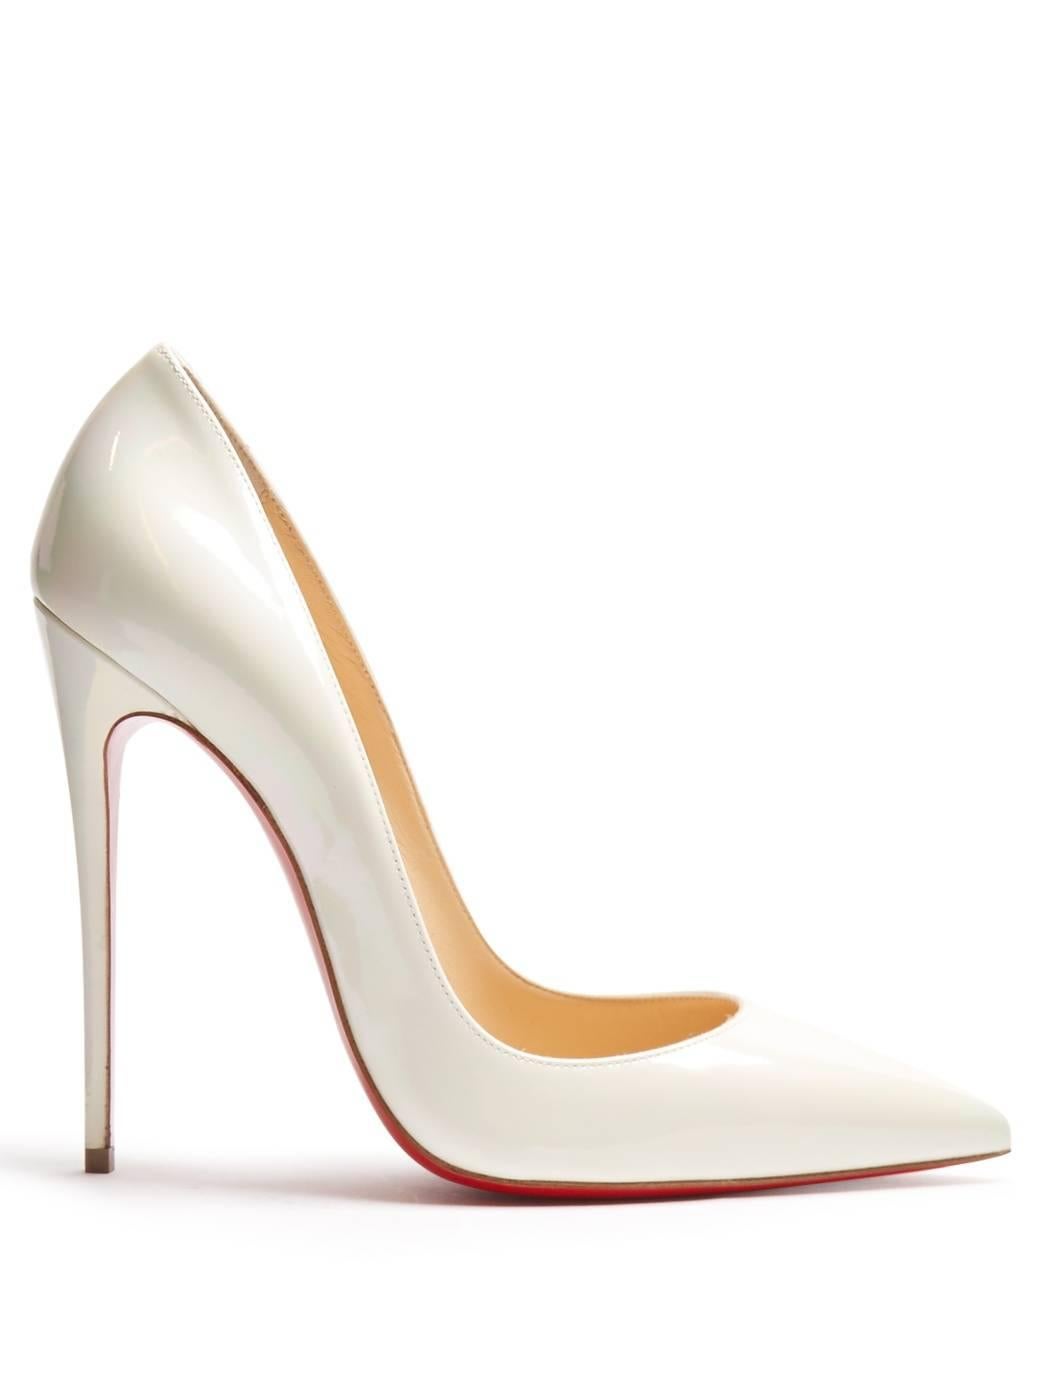 Women's Christian Louboutin New Sold Out White Iridescent So Kate Heels Pumps in Box